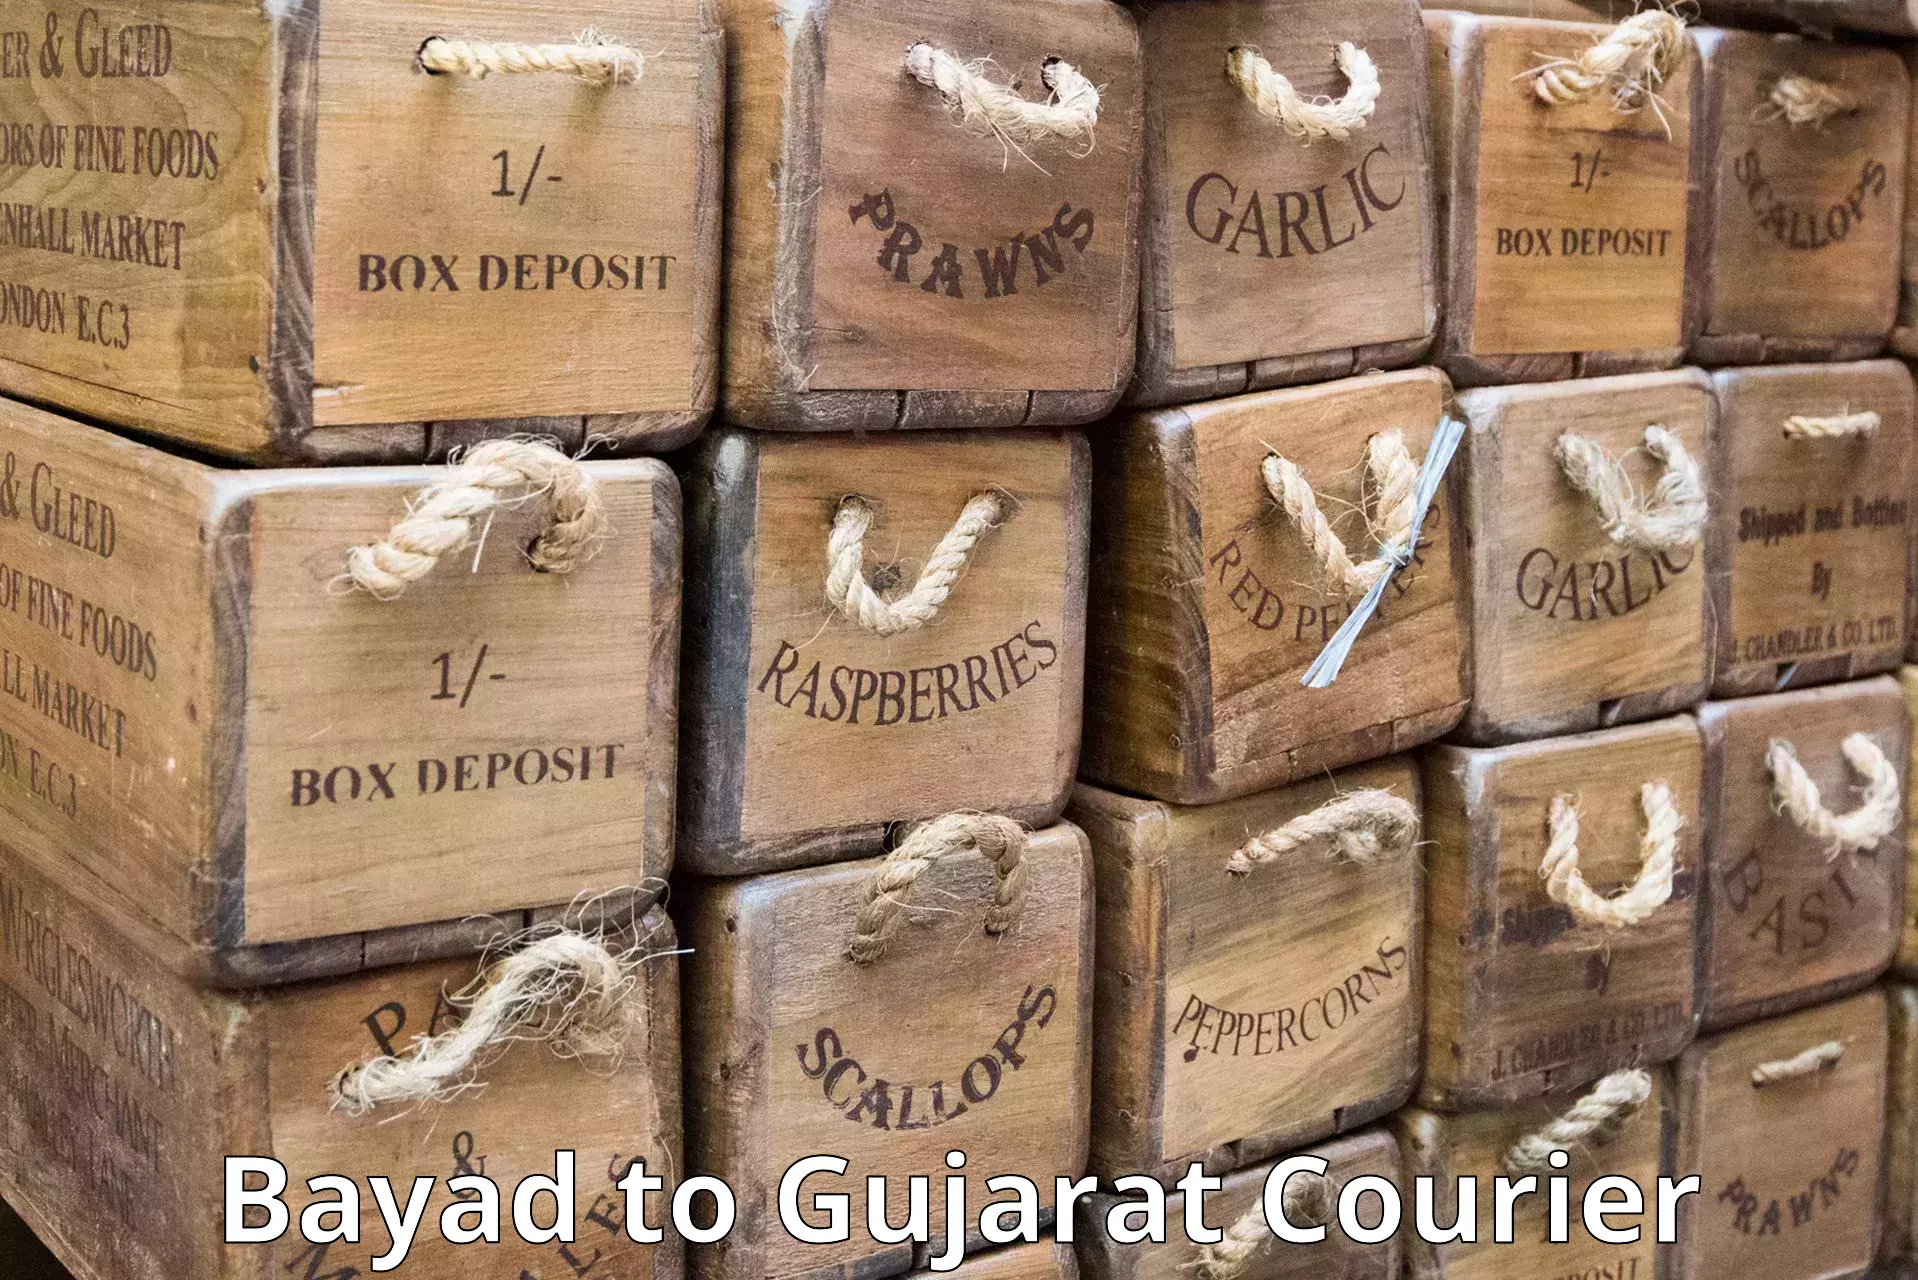 International courier networks Bayad to Jhalod